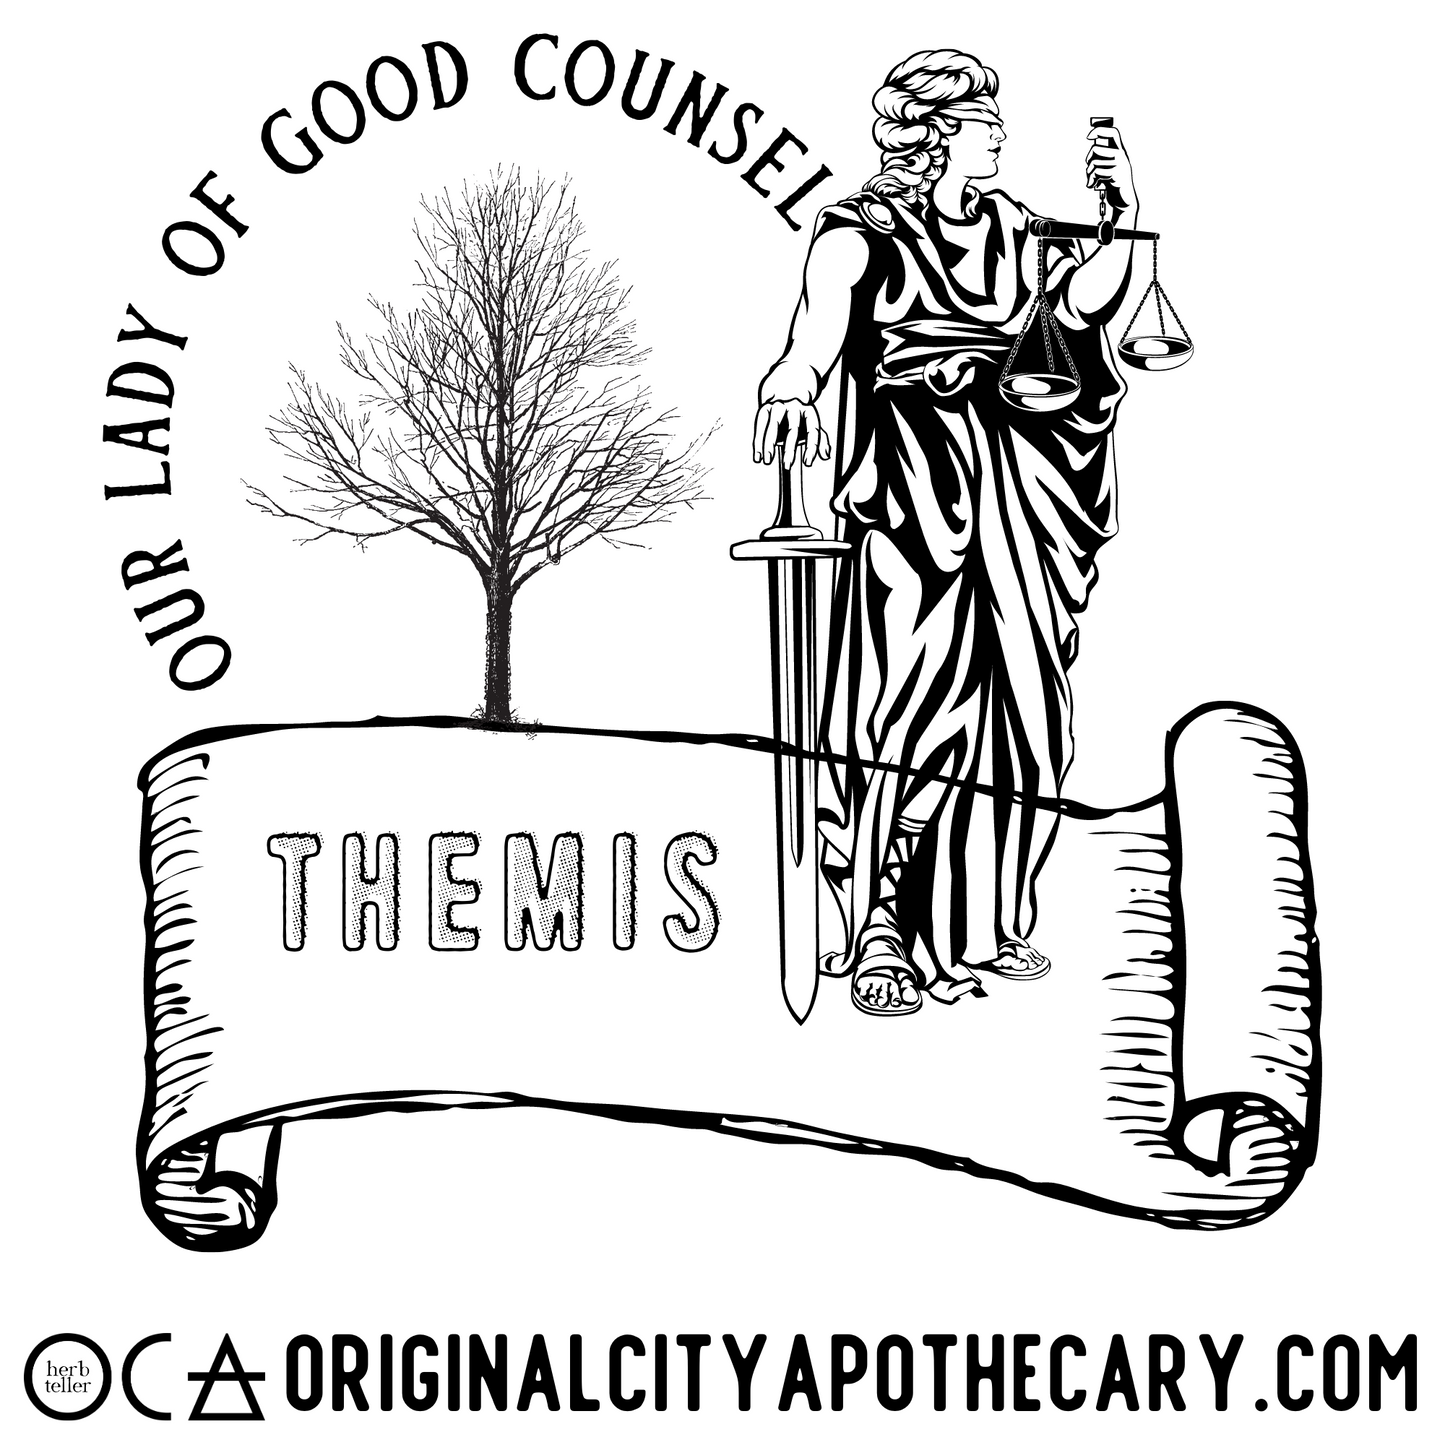 Themis|Lady of Justice Herbal Tea/Infusion